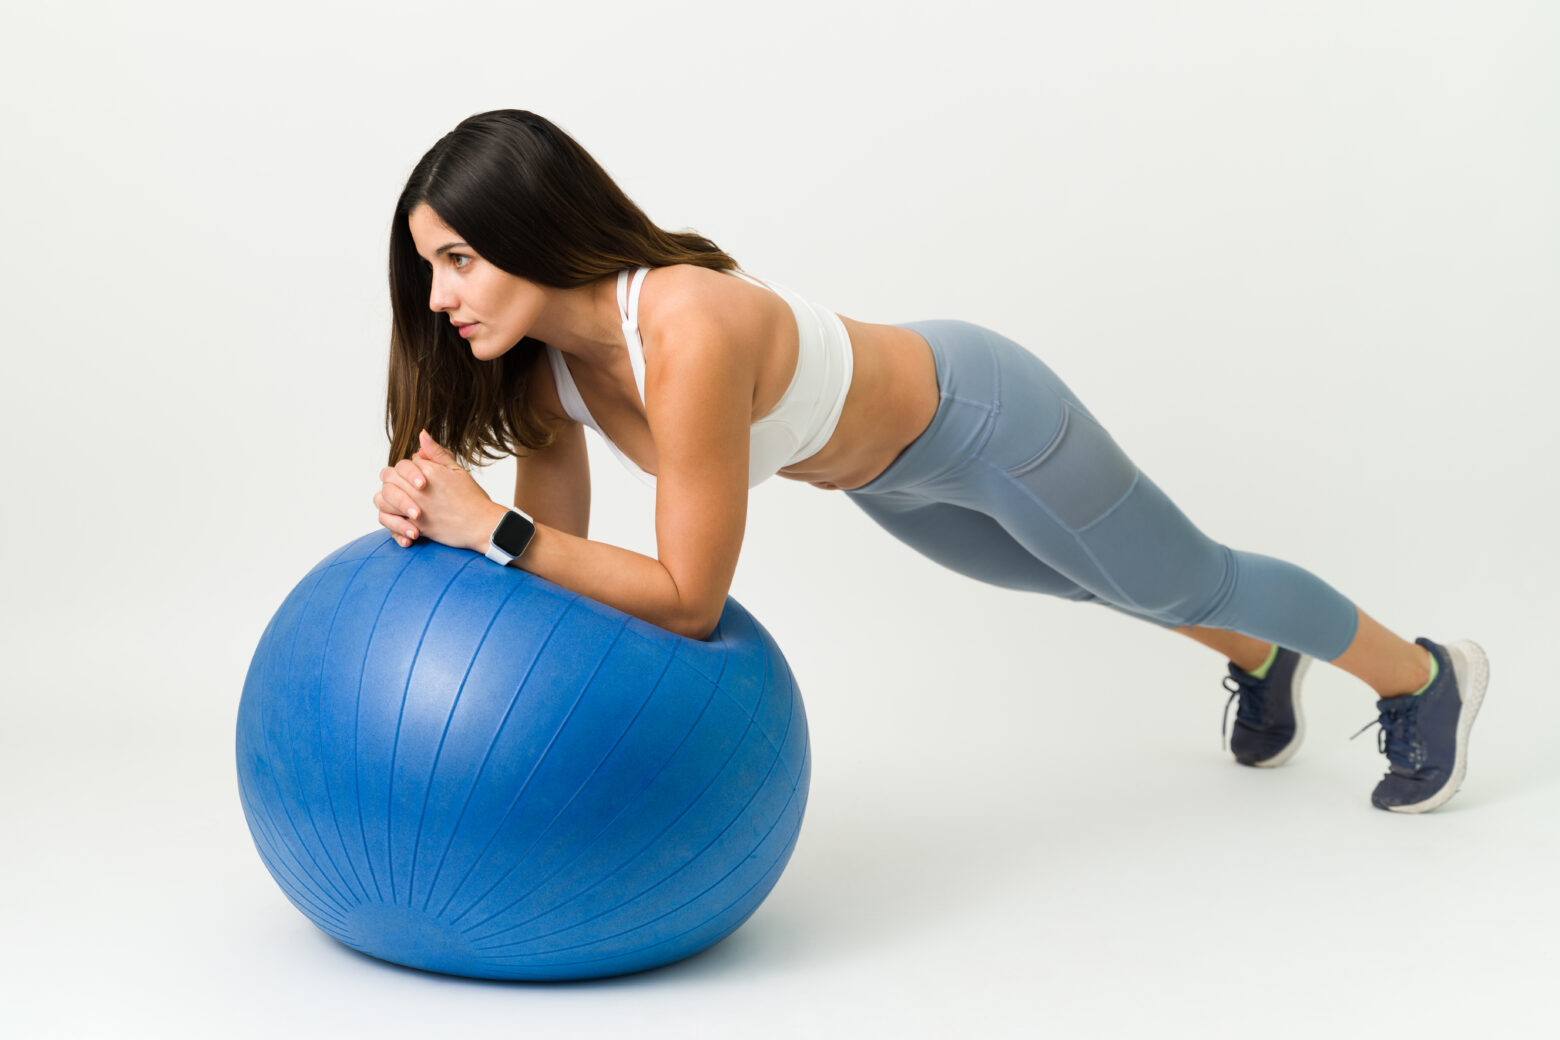 maintaining my ideal weight with exercise fit healthy young woman doing plank stability ball during her daily workout routine - Skoliose: Ingen hindring for et aktivt liv - Smertefribevægelse